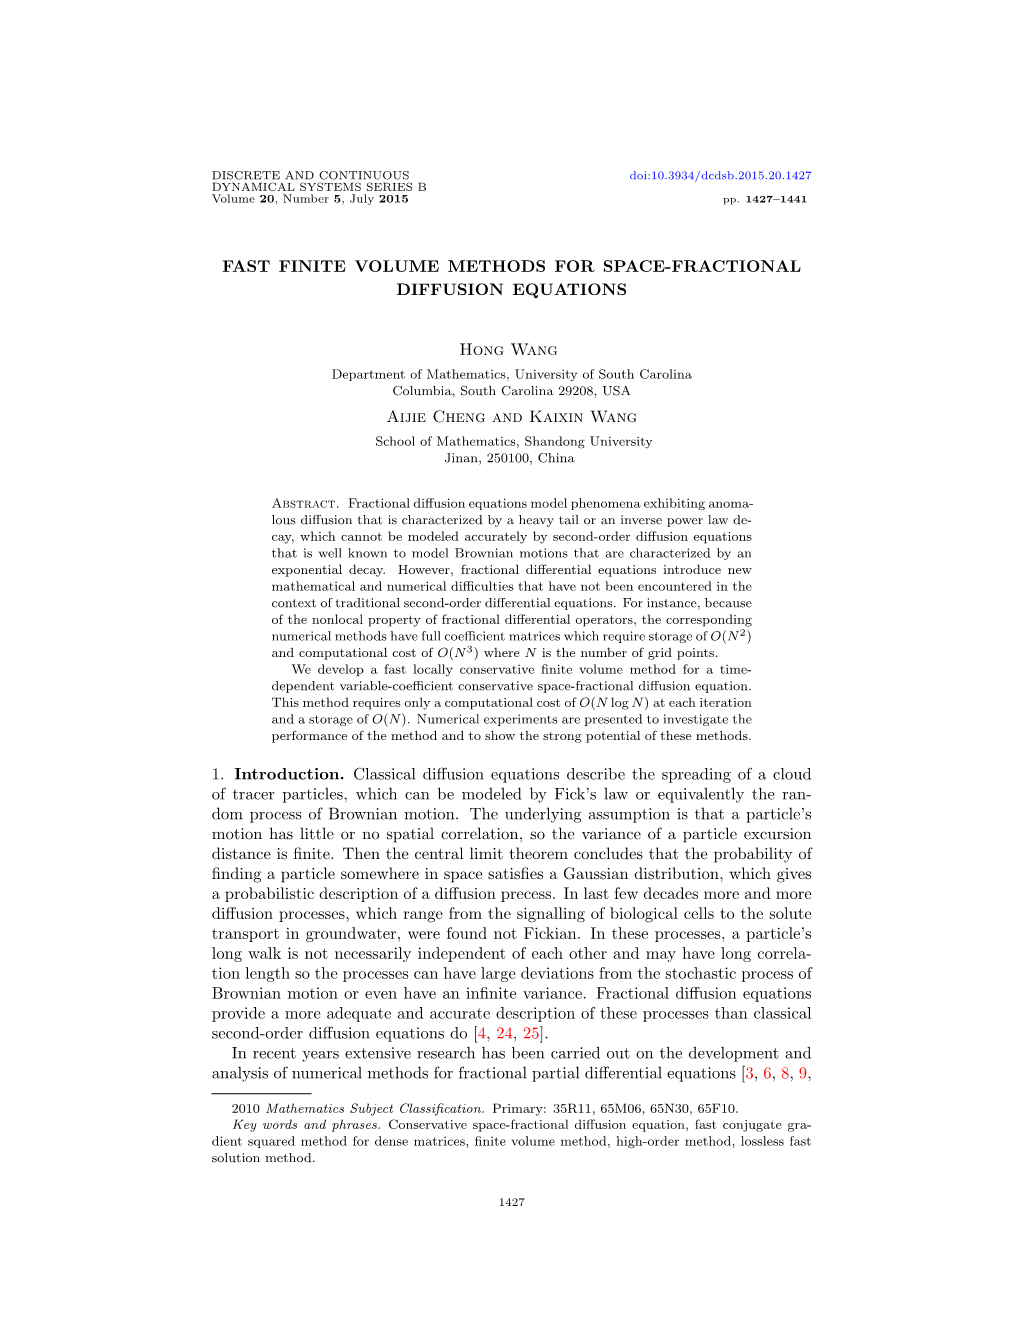 Fast Finite Volume Methods for Space-Fractional Diffusion Equations